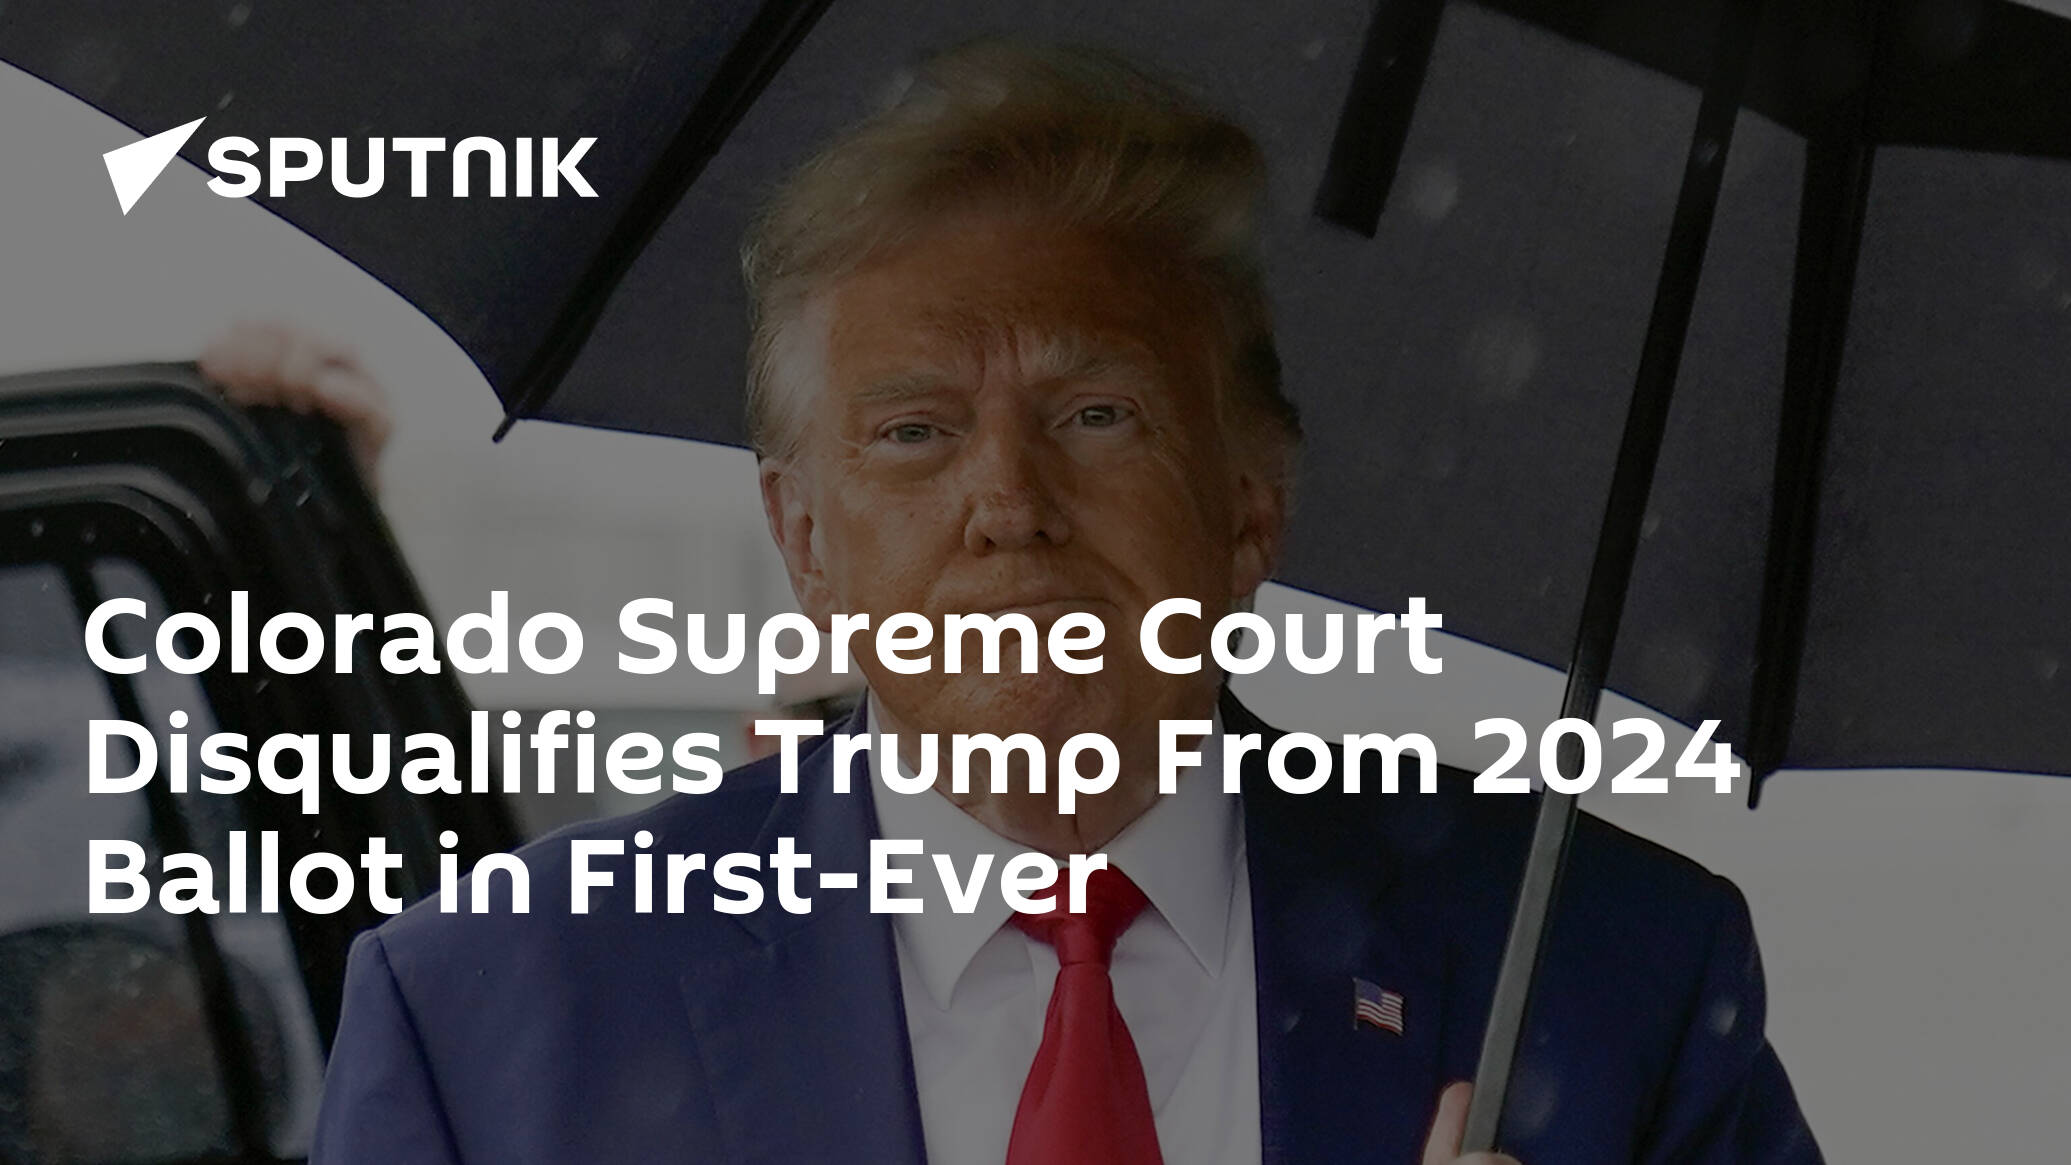 Colorado Court Rules Trump ‘Disqualified’ From 2024 Primary Ballot